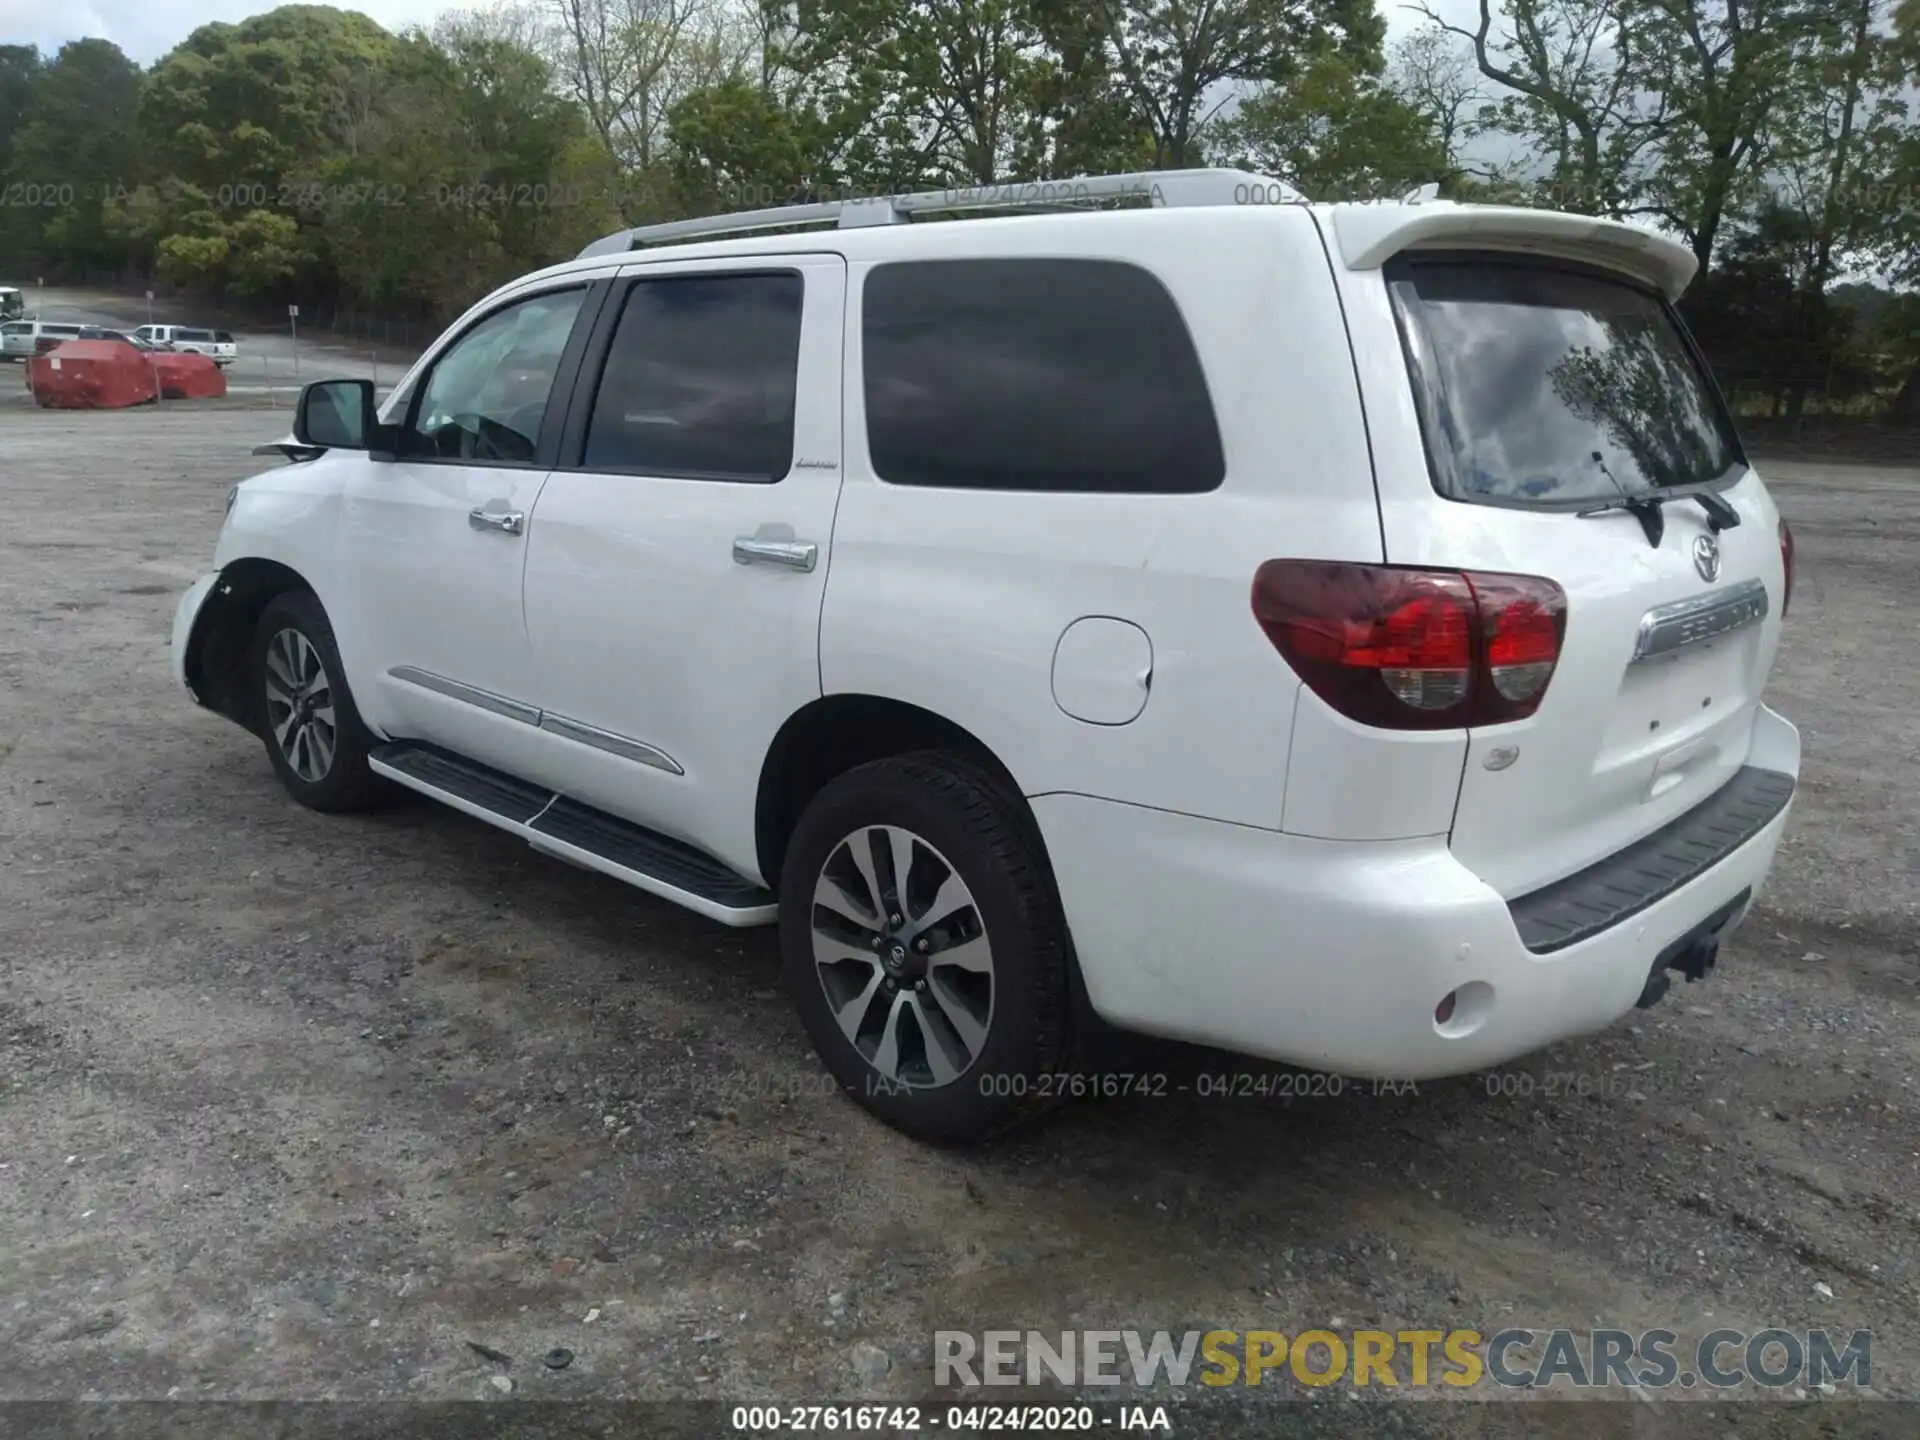 3 Photograph of a damaged car 5TDJY5G12KS171373 TOYOTA SEQUOIA 2019